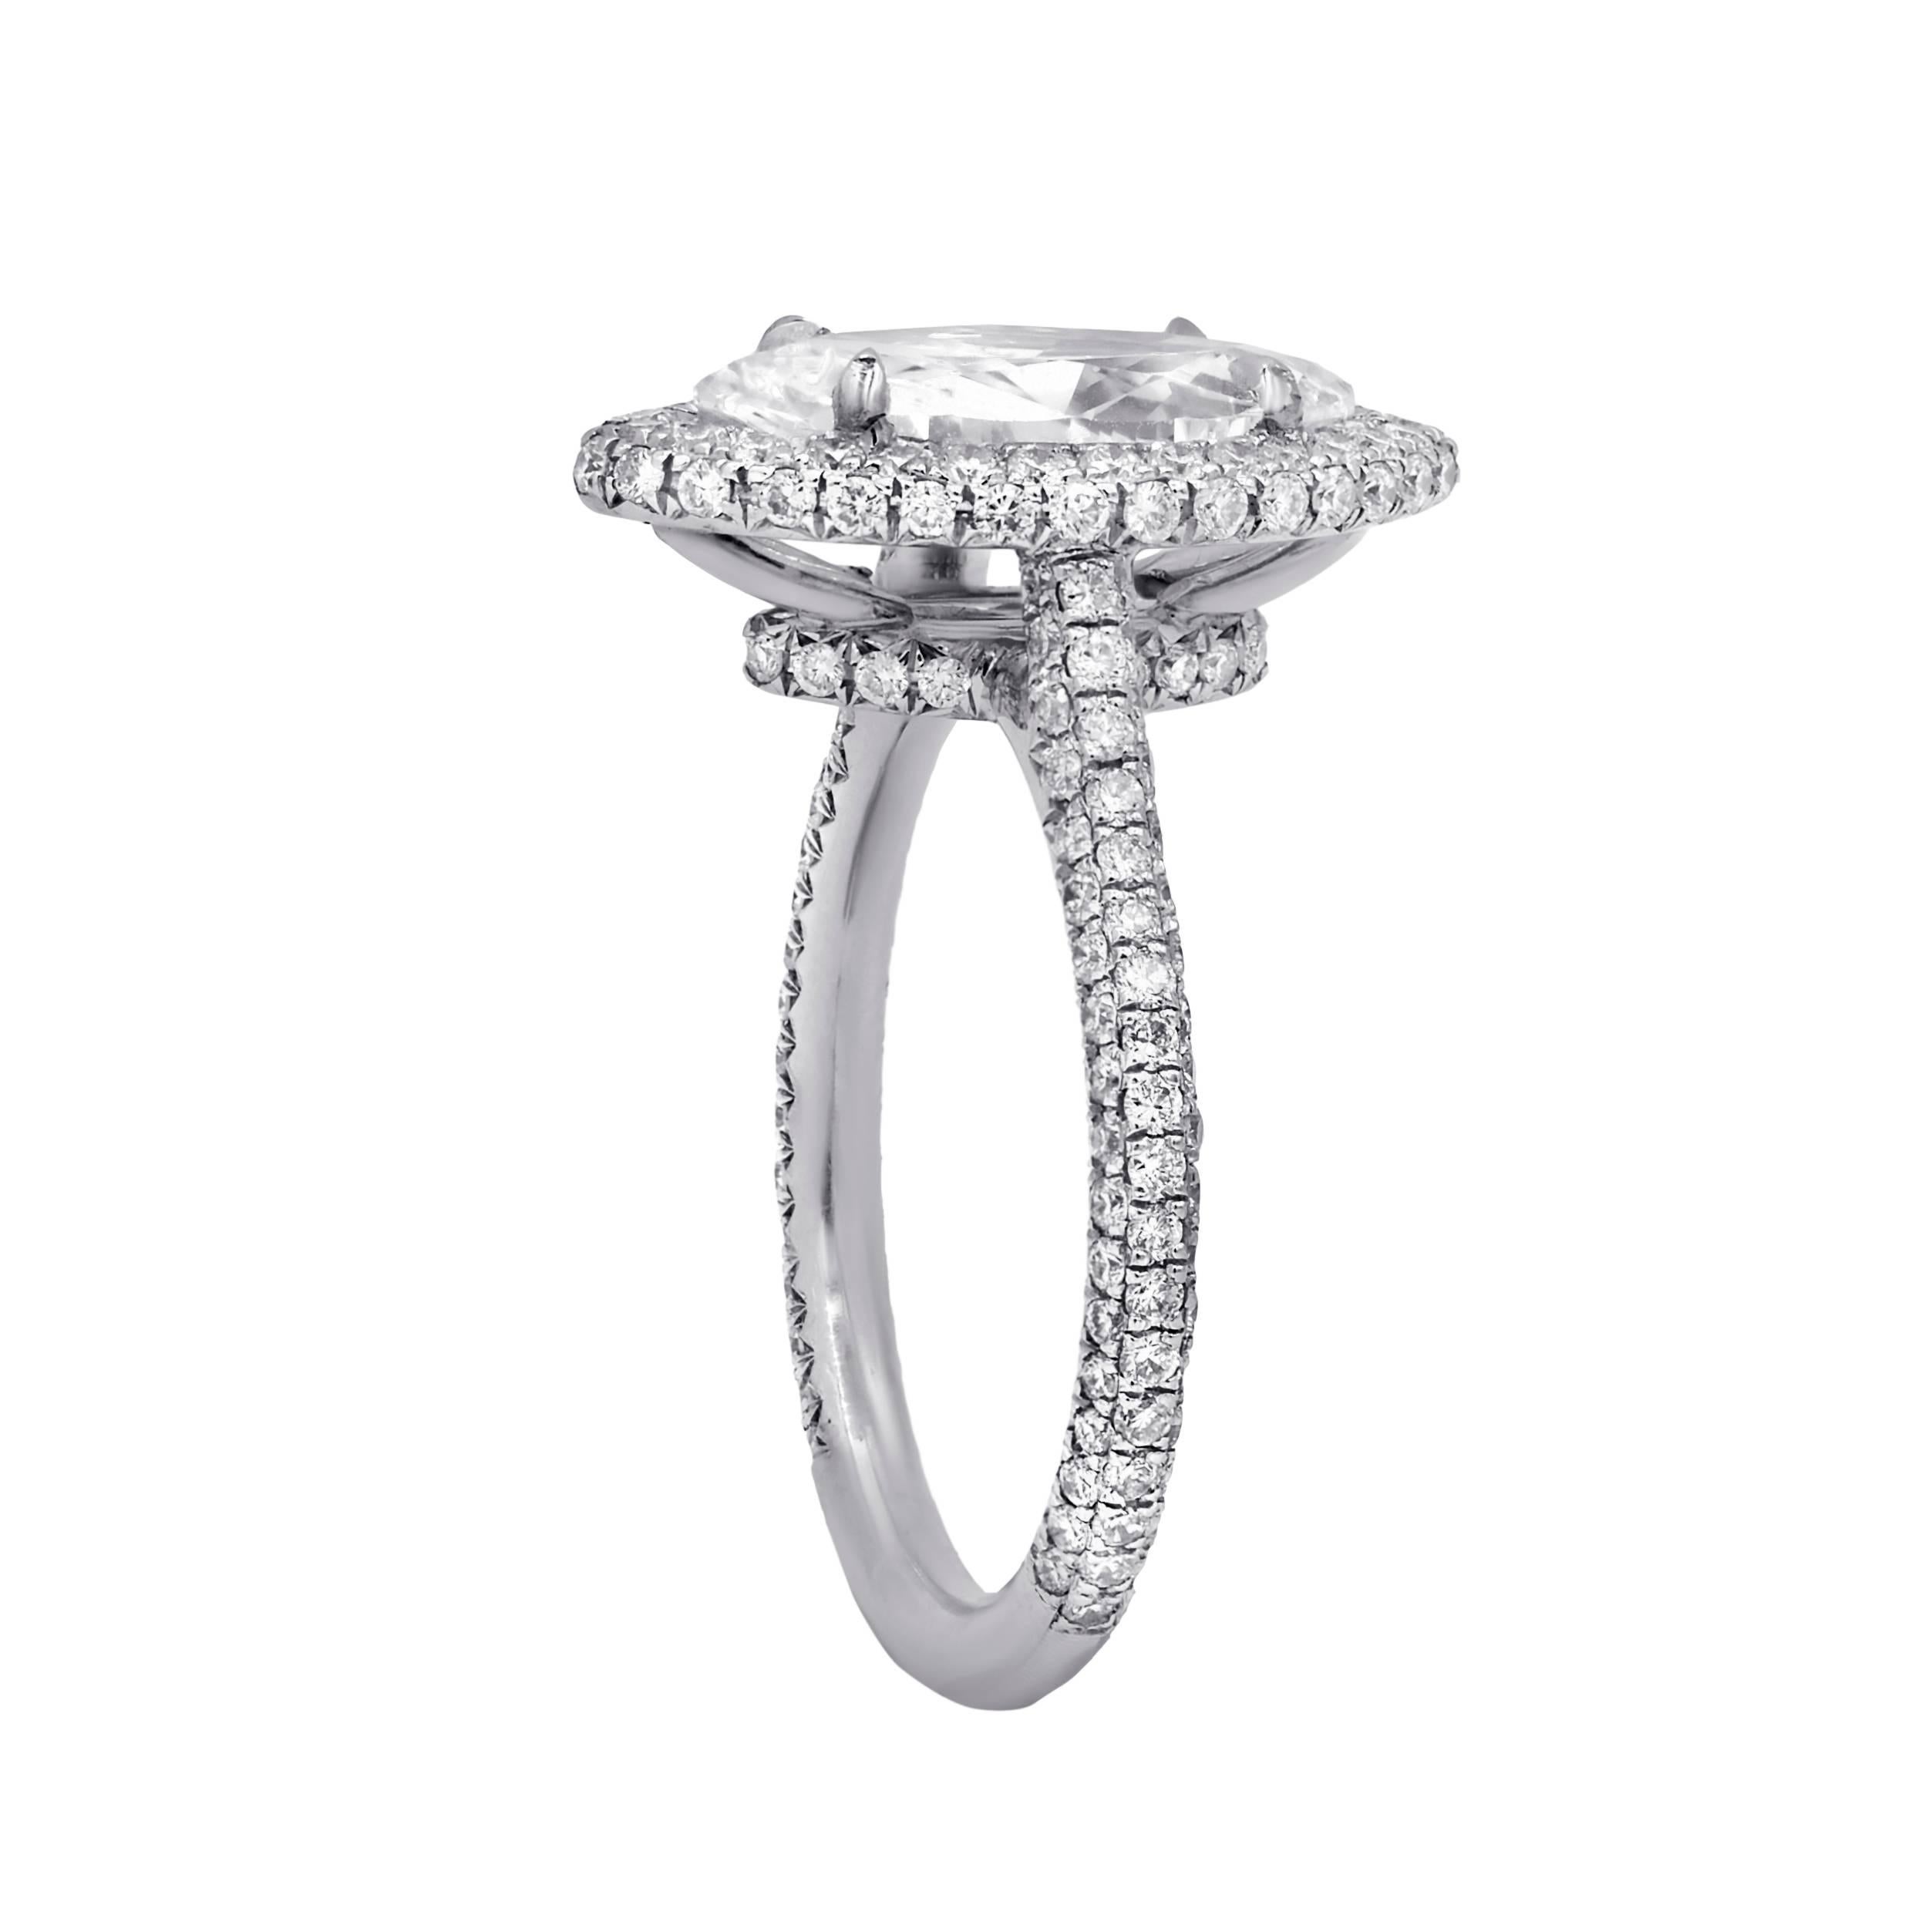 Elegant and custom designed  halo engagement ring in French pave set.The center GIA certified  marquise brilliant cut diamond features 2.00 cts D color/VS1 clarity and enhanced by sparkling  1.26 cts micro pave diamonds on the side in platinum